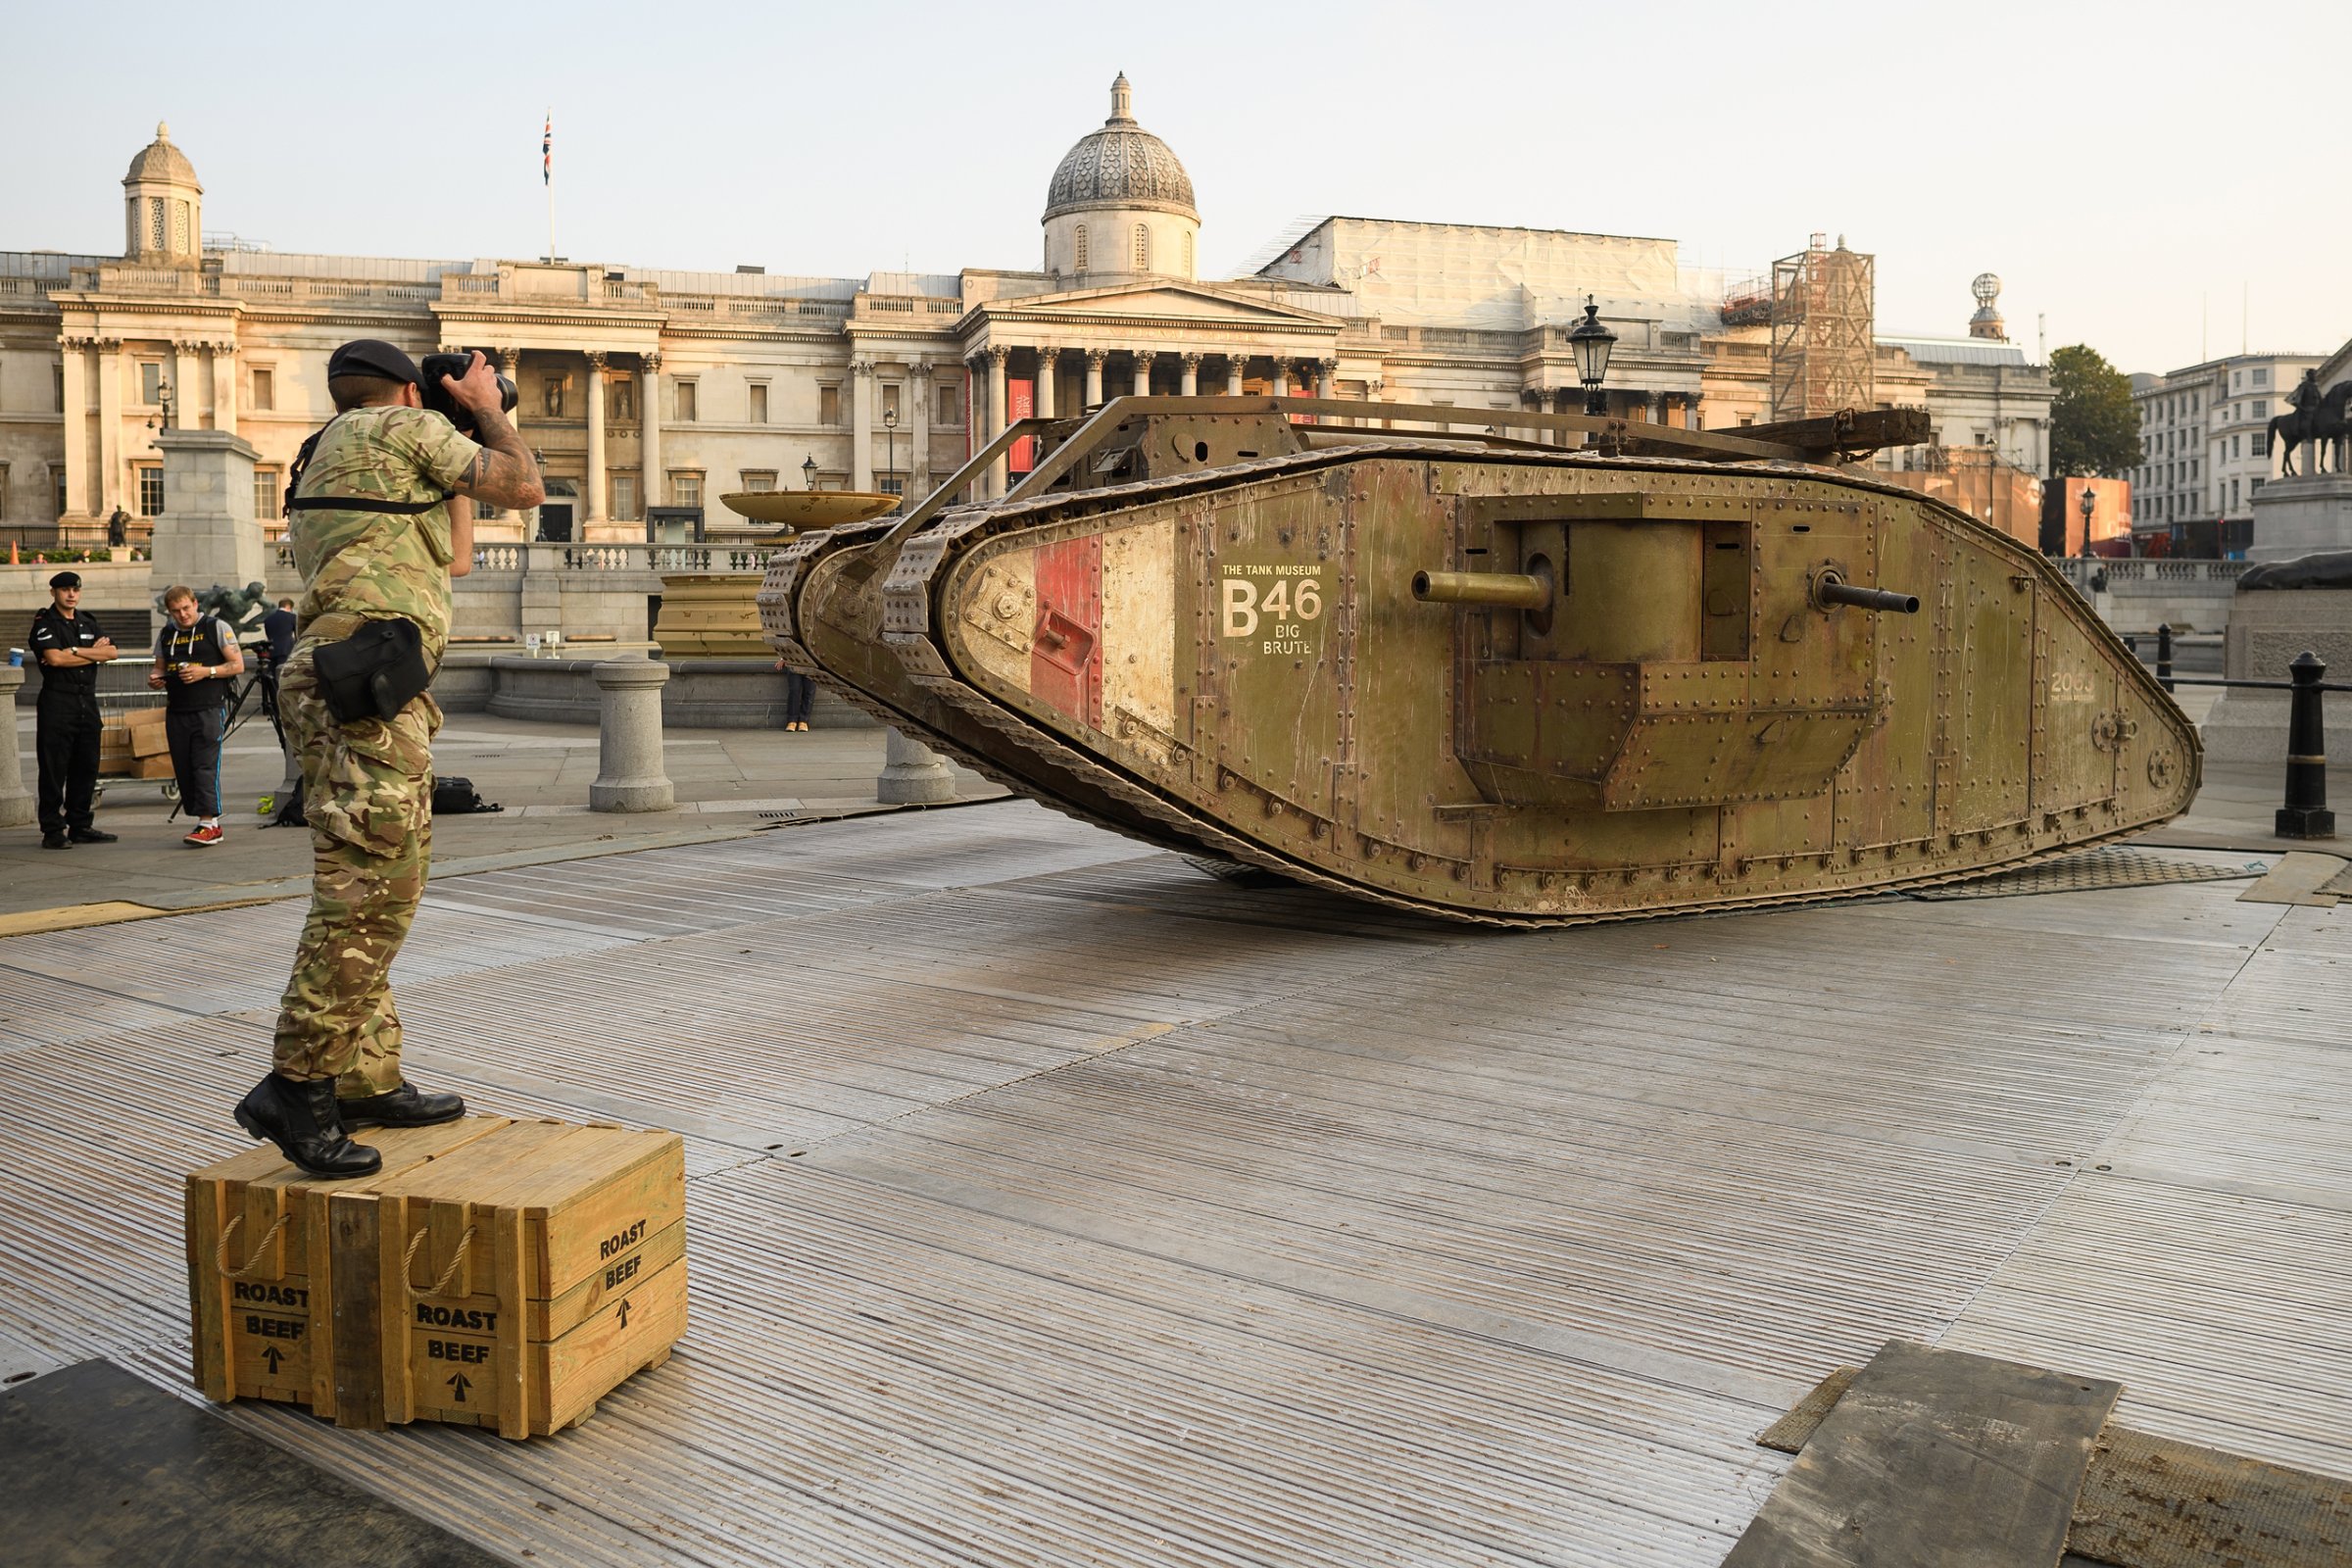 LONDON, ENGLAND - SEPTEMBER 15: An Army photographer takes a photograph of a replica British Mark IV tank as it is displayed in Trafalgar Square on September 15, 2016 in London, England. The tank is in place to mark 100 years to the day since they were first used in action during World War One. (Photo by Leon Neal/Getty Images)